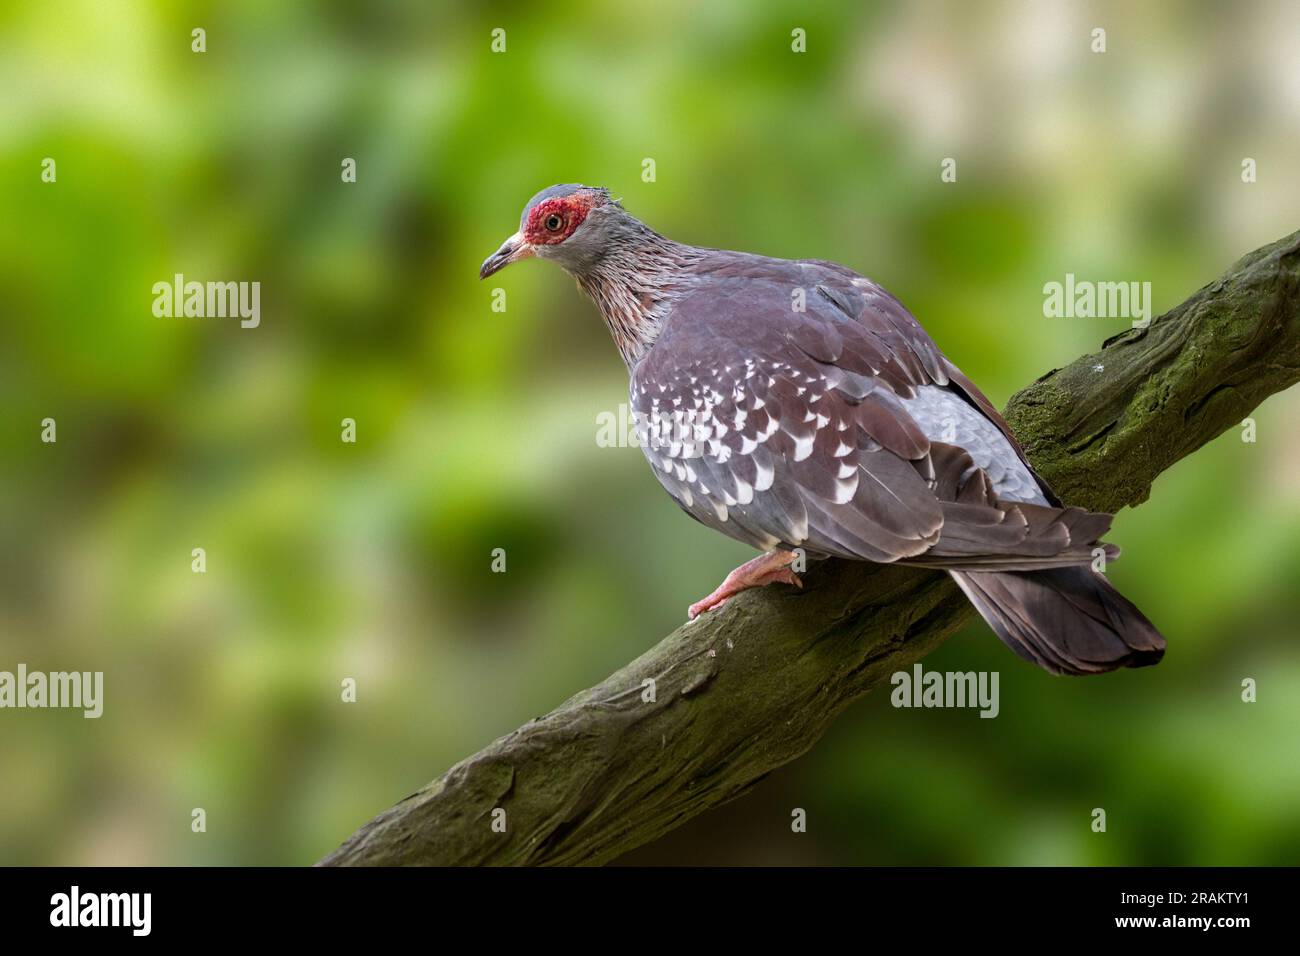 Speckled pigeon / African rock pigeon / Guinea pigeon (Columba guinea) native to much of Africa south of the Sahara Stock Photo